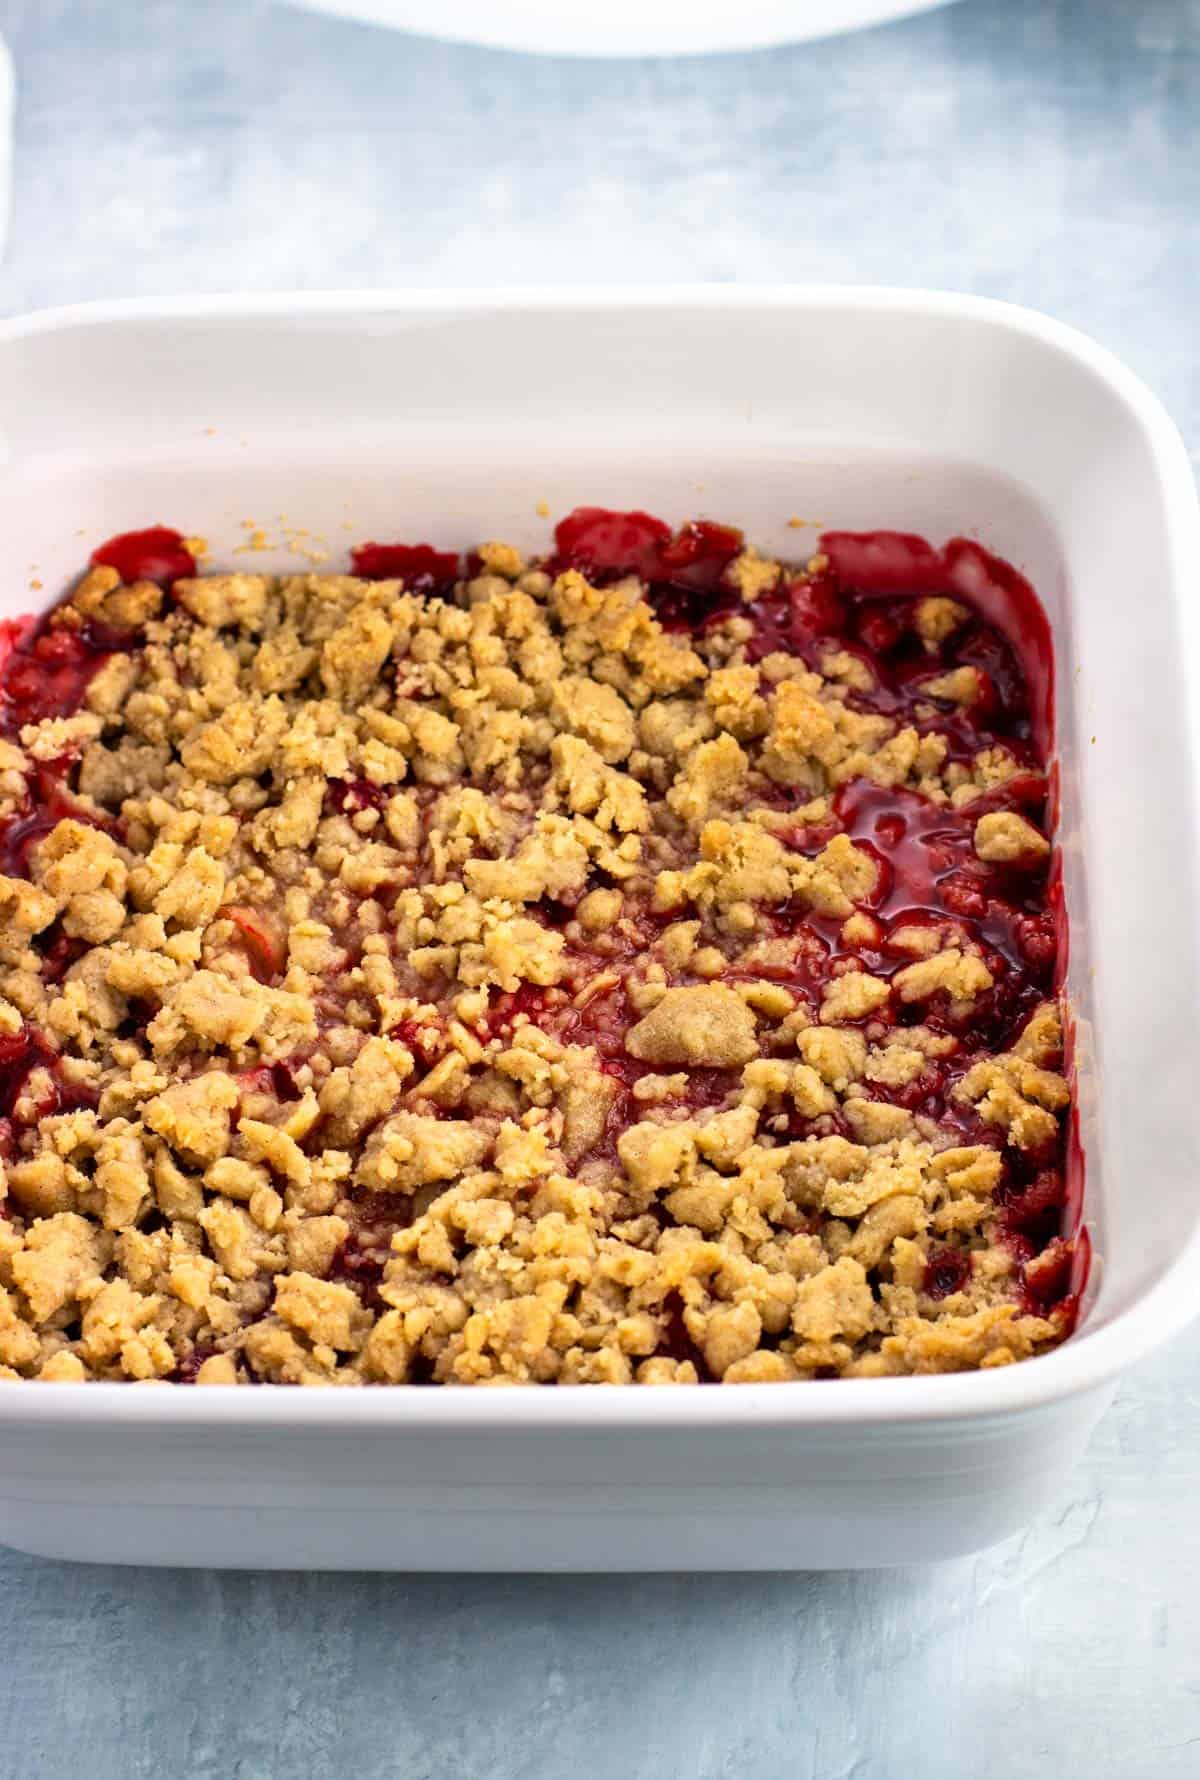 Baked strawberry rhubarb crumble in a baking dish.